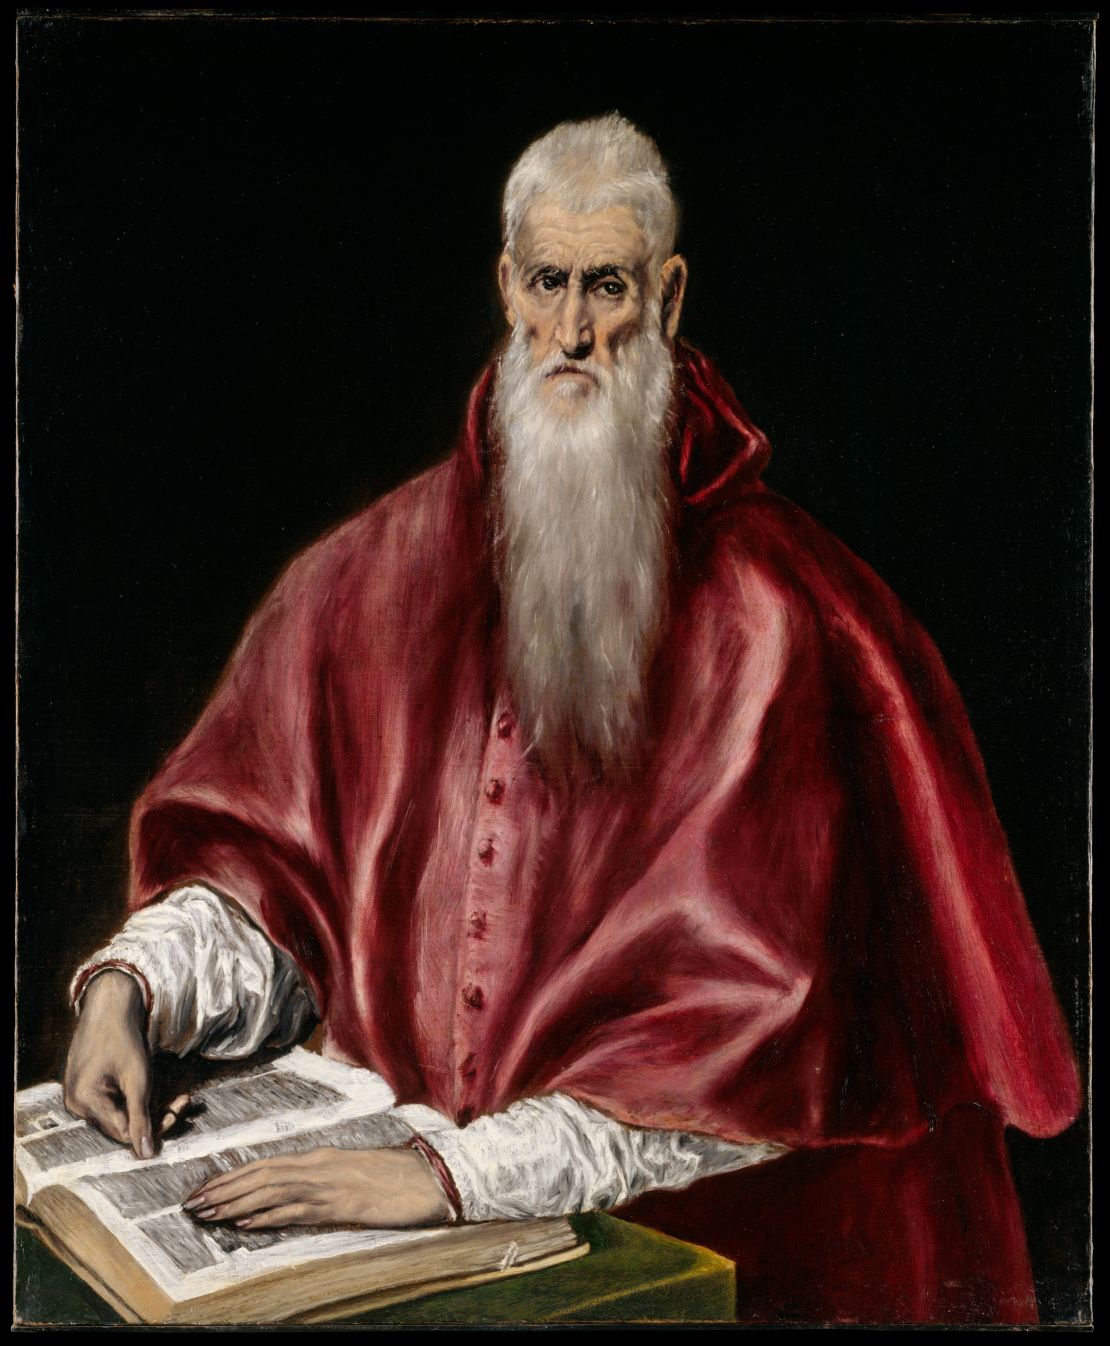 El Greco's elongated portraits, such as "Saint Jerome as a Scholar" (c. 1610), have sparked debate in the medical community about the artitst's eyesight.